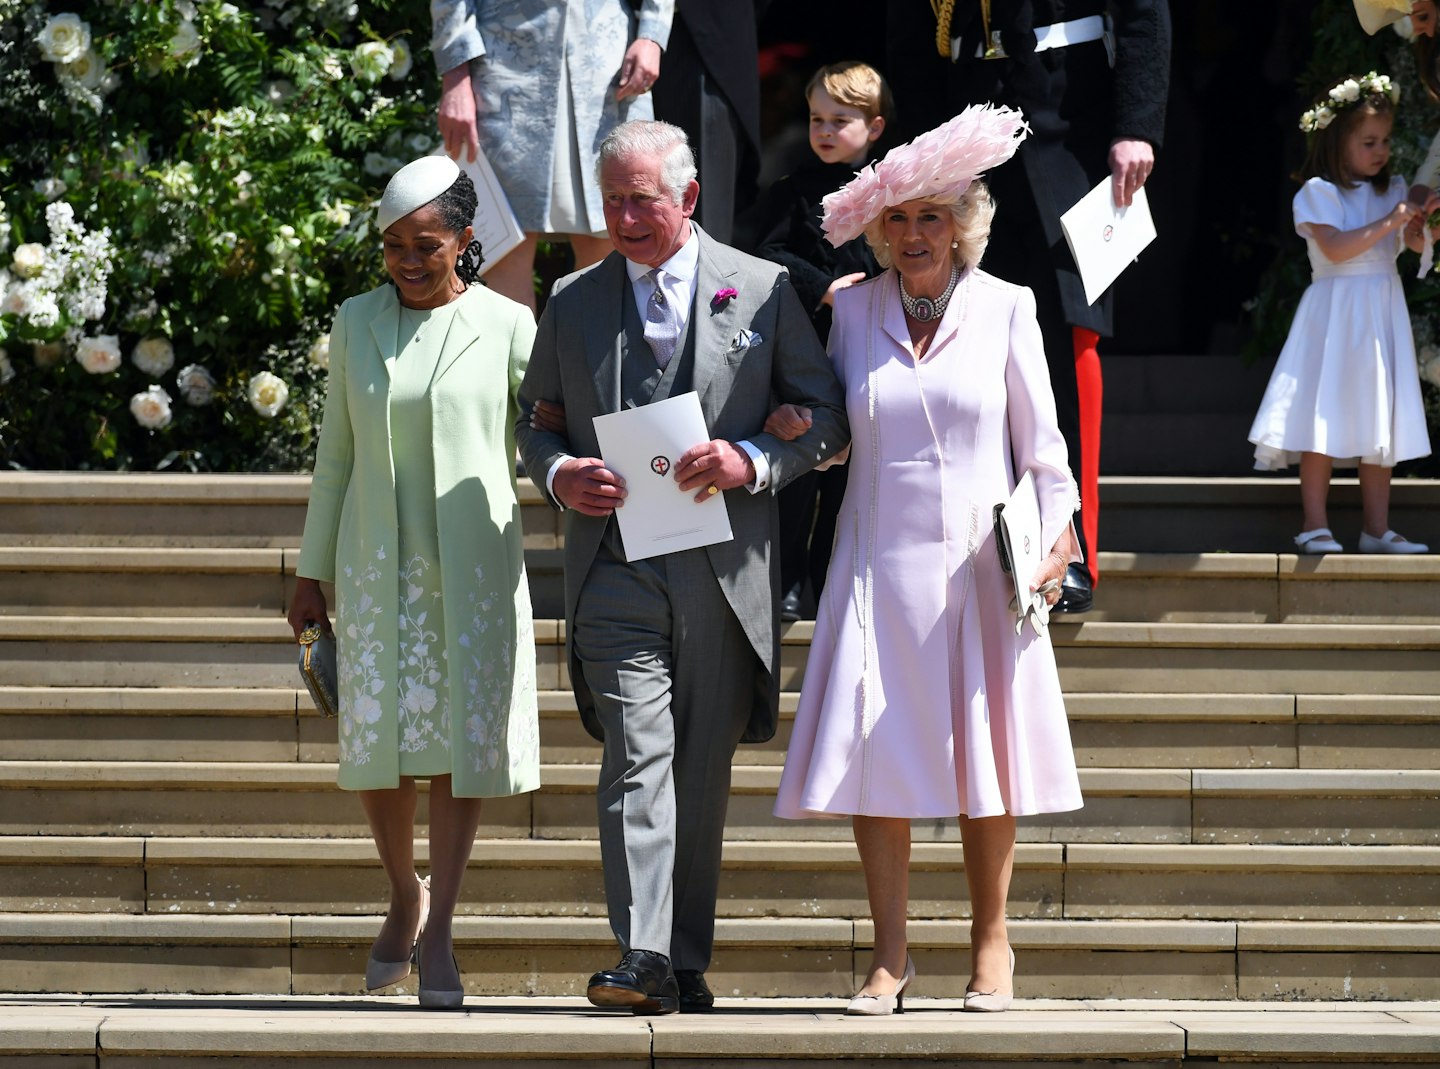 Prince Charles hints his grey suit is his wardrobe staple